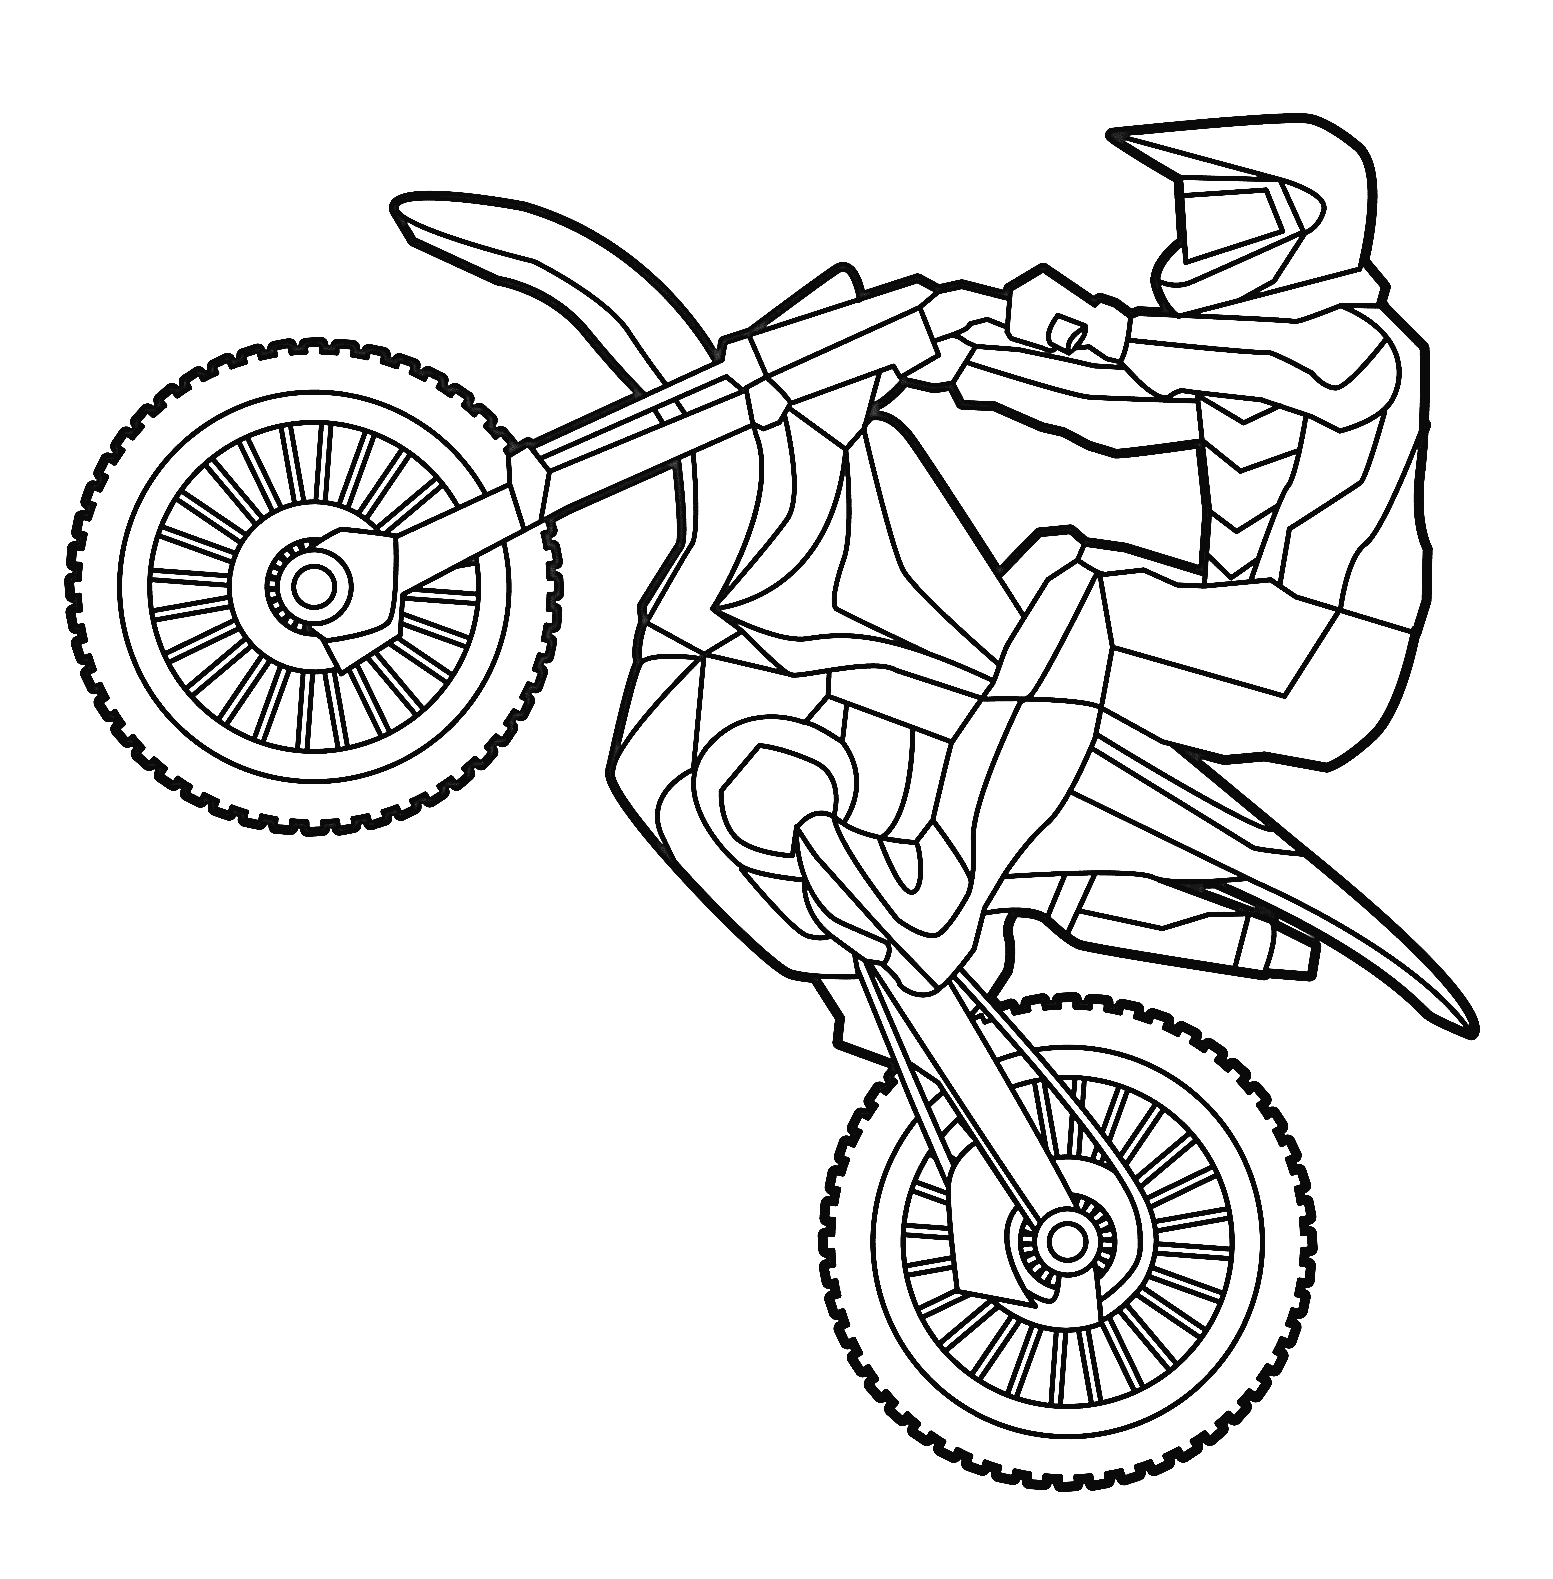 Dirt Bike Coloring Pages - Coloring Pages For Kids And Adults